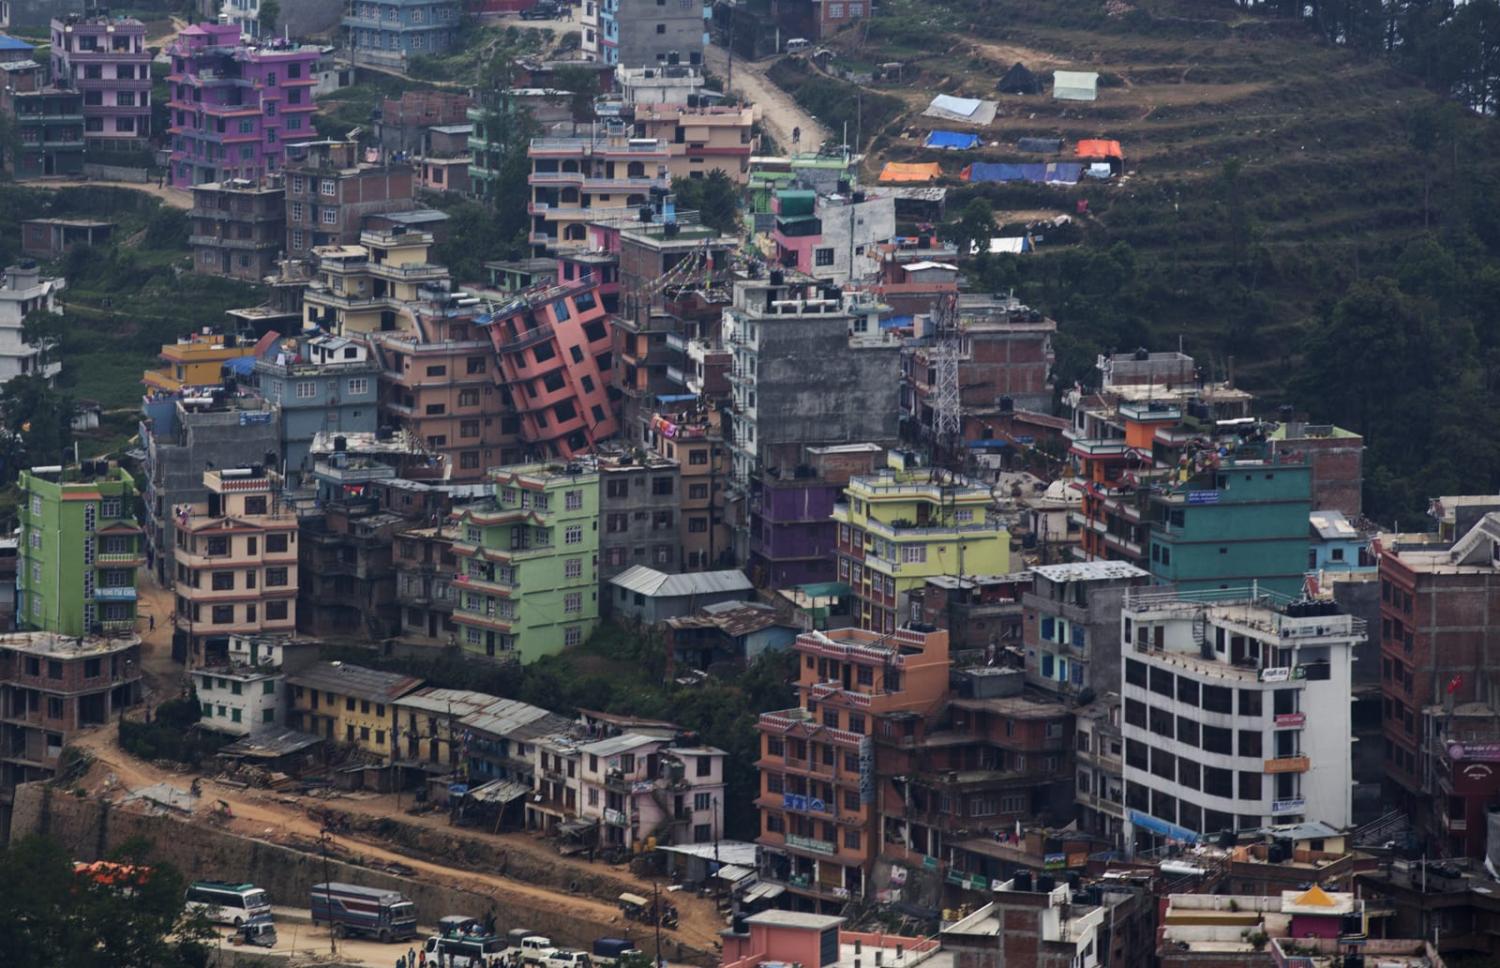 Recovery efforts following the 2015 earthquake near Kathmandu, Nepal (Jeffrey D. Anderson/Marine Corps/US Department of Defence)